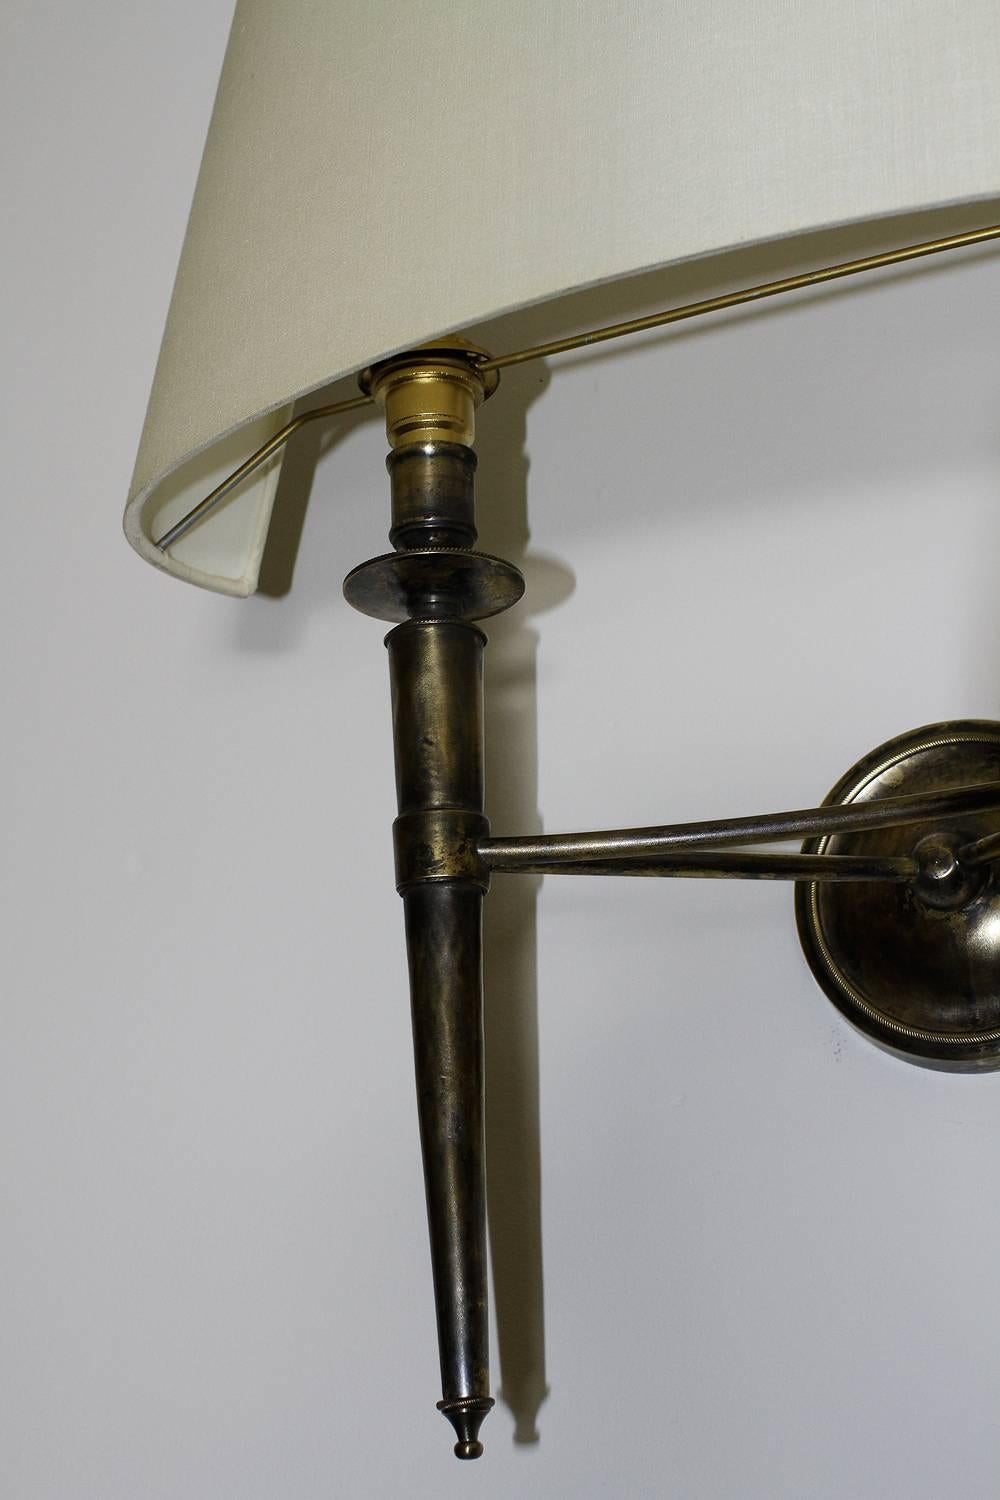 Prince De Galles Hotel Elegant Pair of Oxidized Brass Sconces 1940 In Fair Condition For Sale In Encino, CA